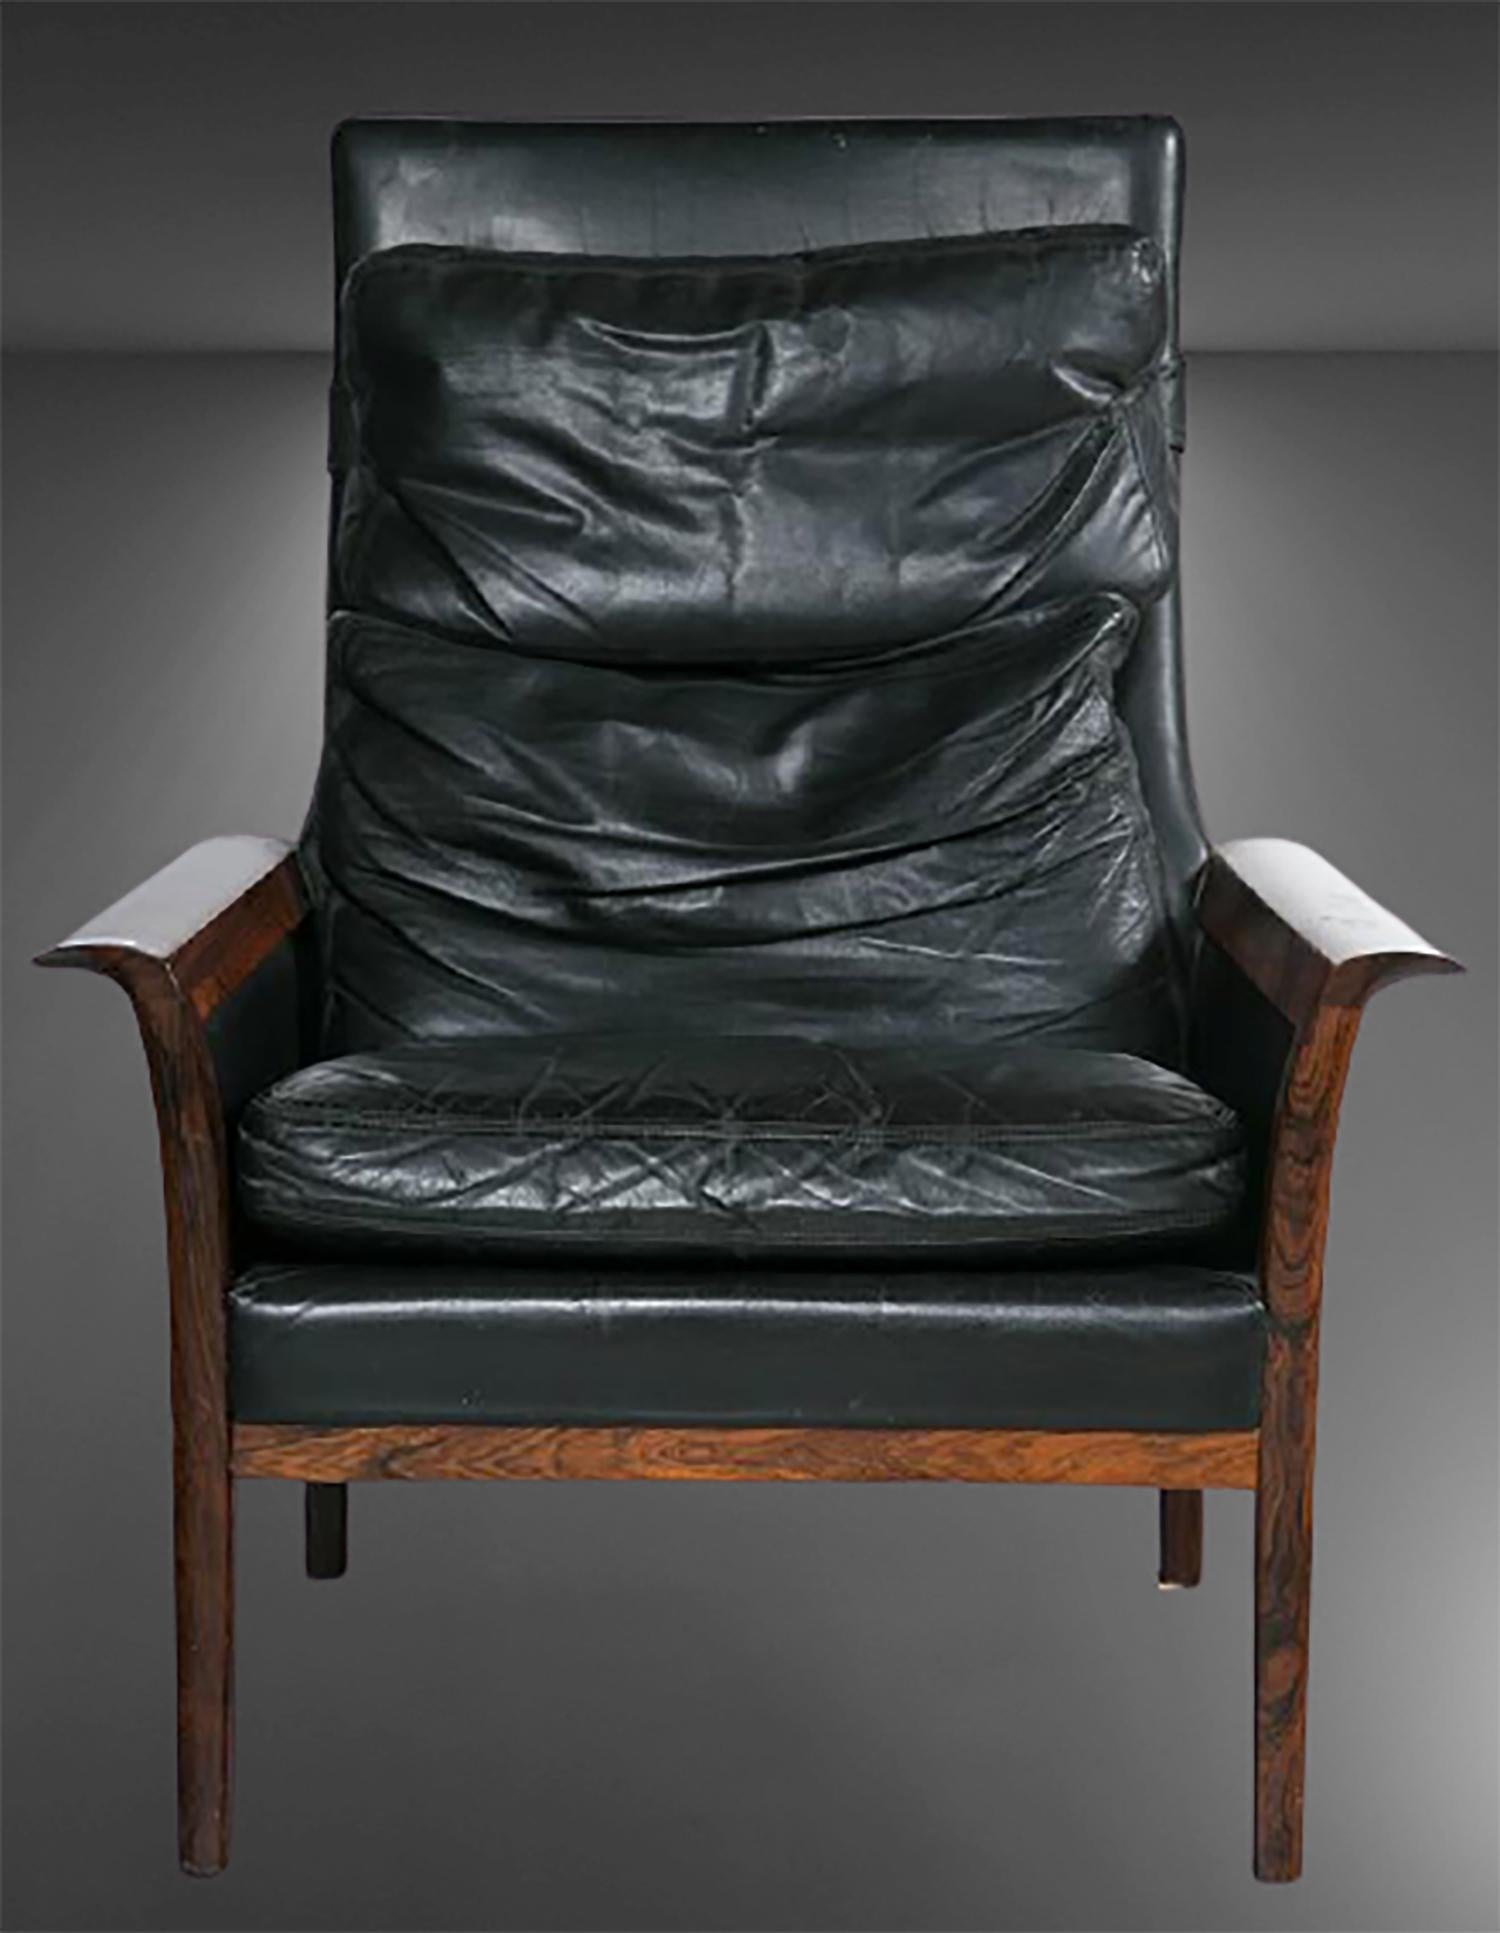 Otto Hans Olsen Rosewood Lounge Chair and Ottoman. Otto Hans Olsen for VATNE MOBLER. Black Leather. Rolled winged edge rosewood arms

Danish lounge chair and ottoman in a rosewood frame. This finely polished rosewood frame with dowel construction